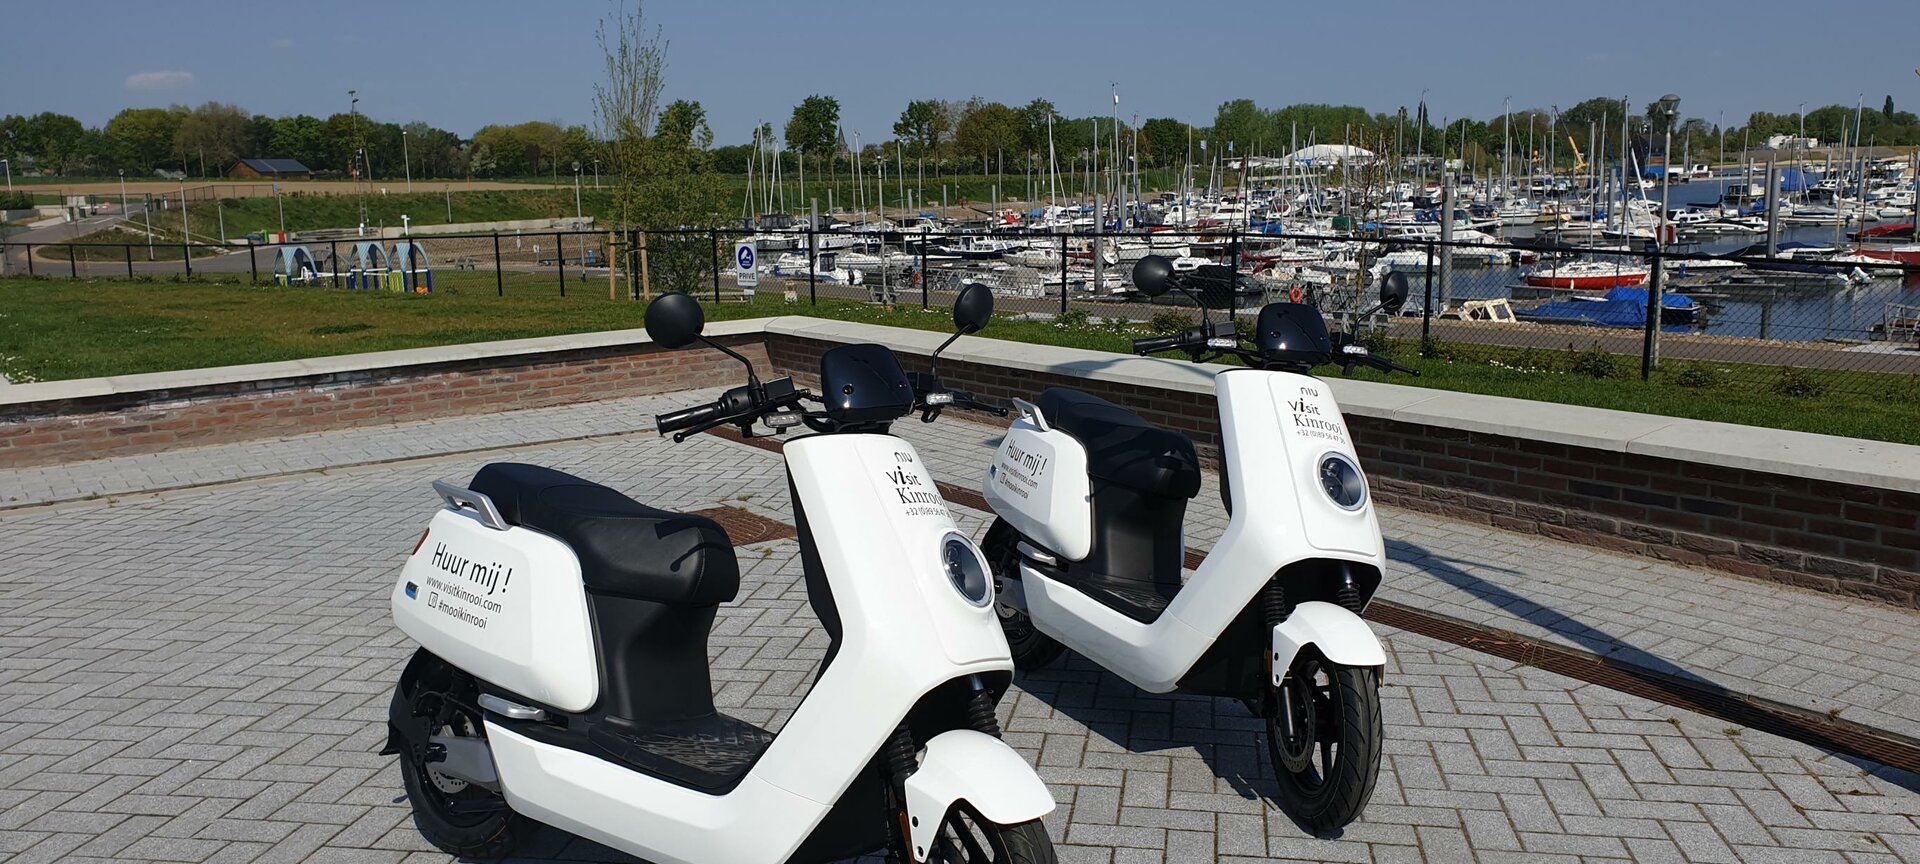 E-scooters - E-scooter bij haven